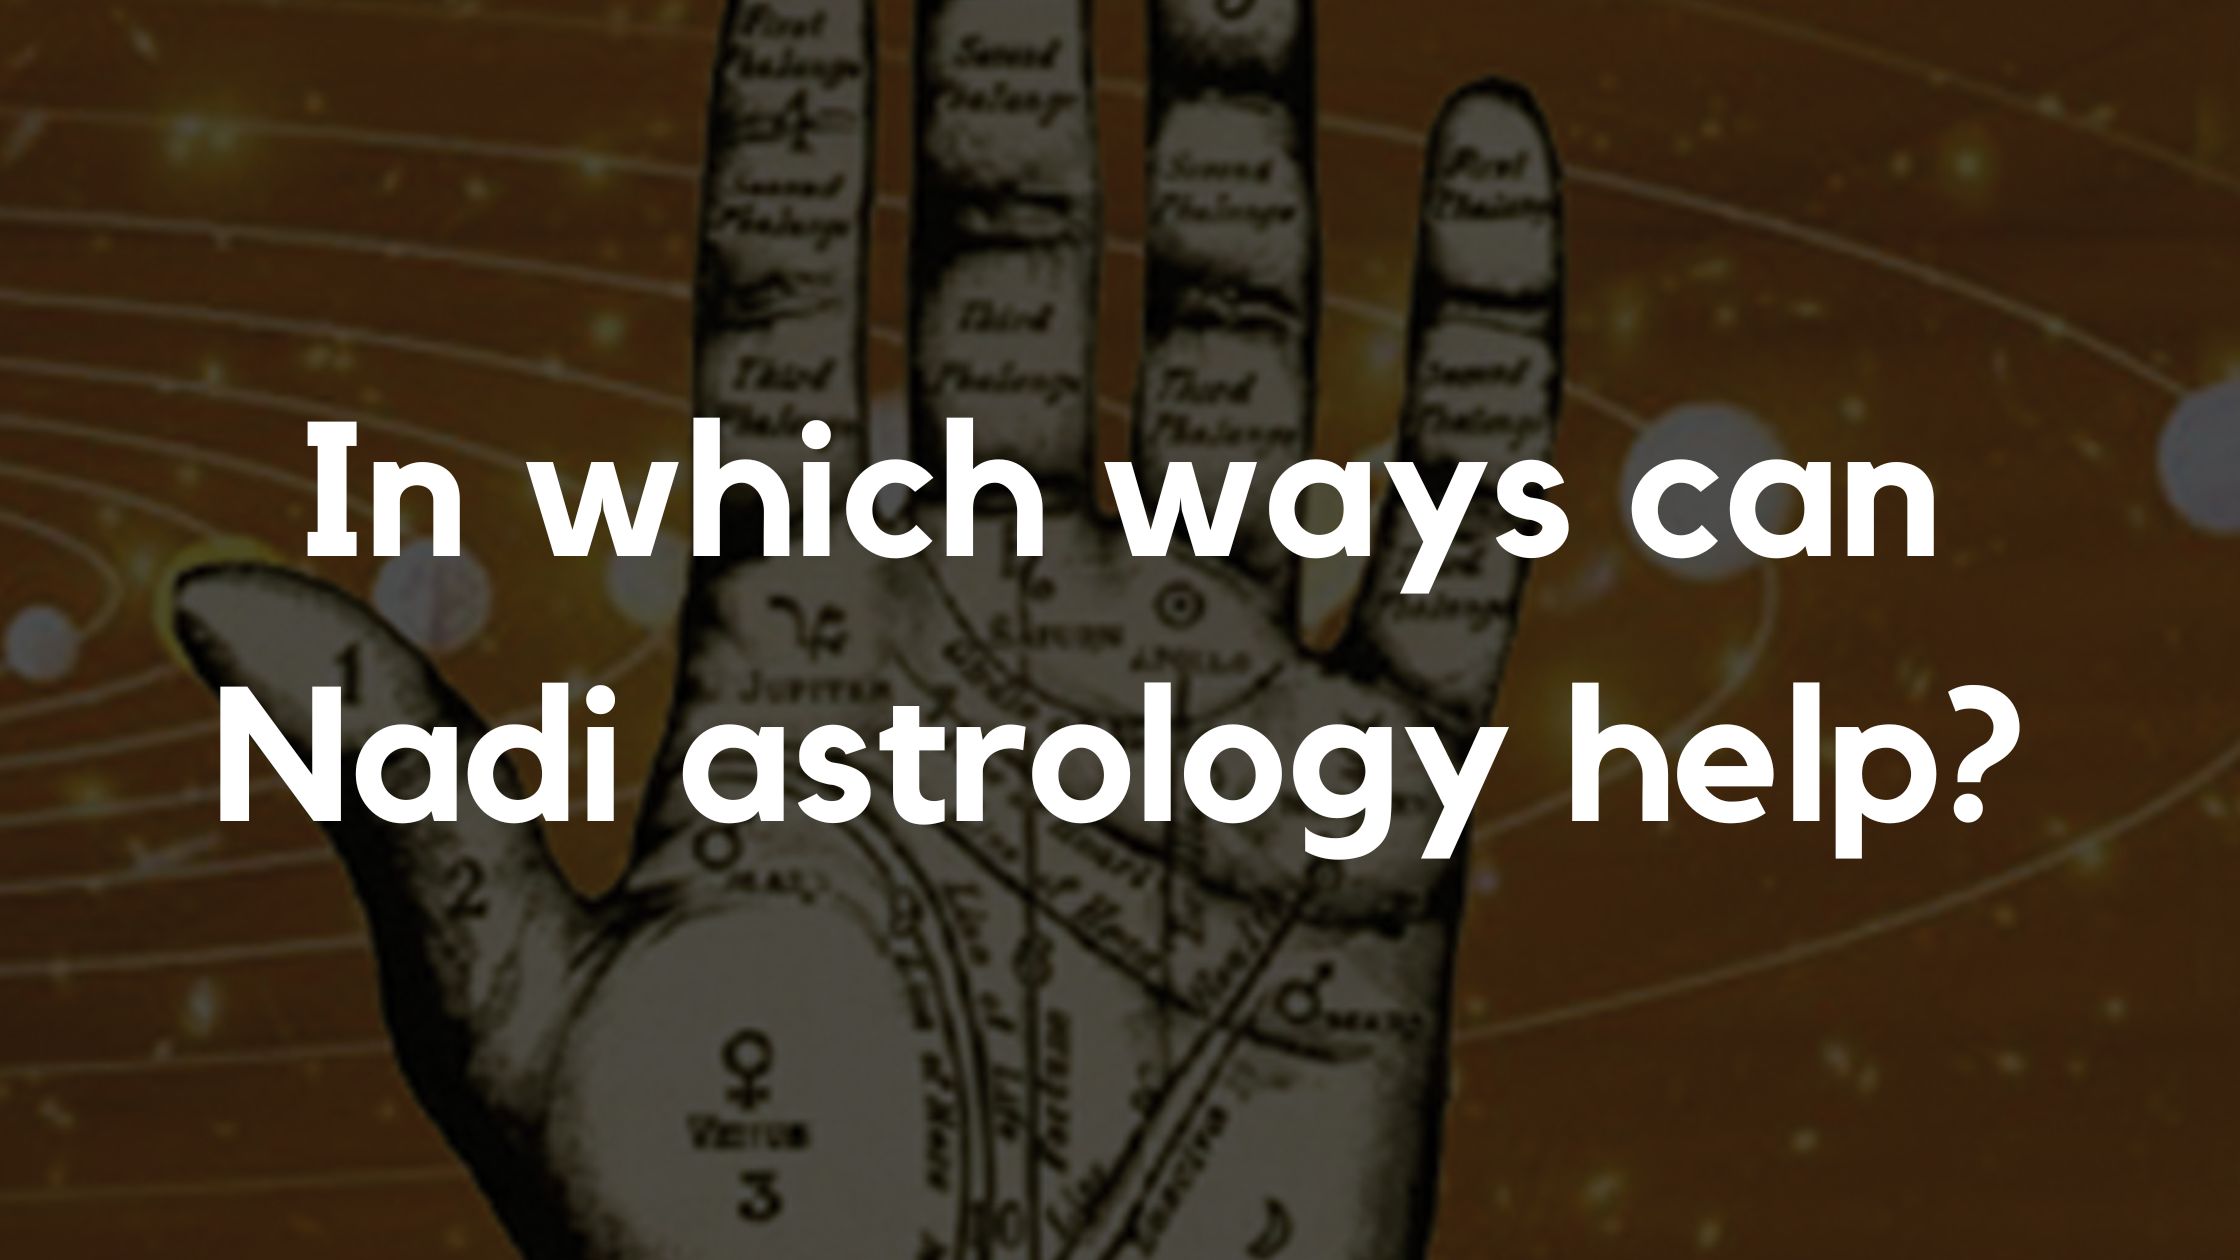 In which ways can Nadi astrology help